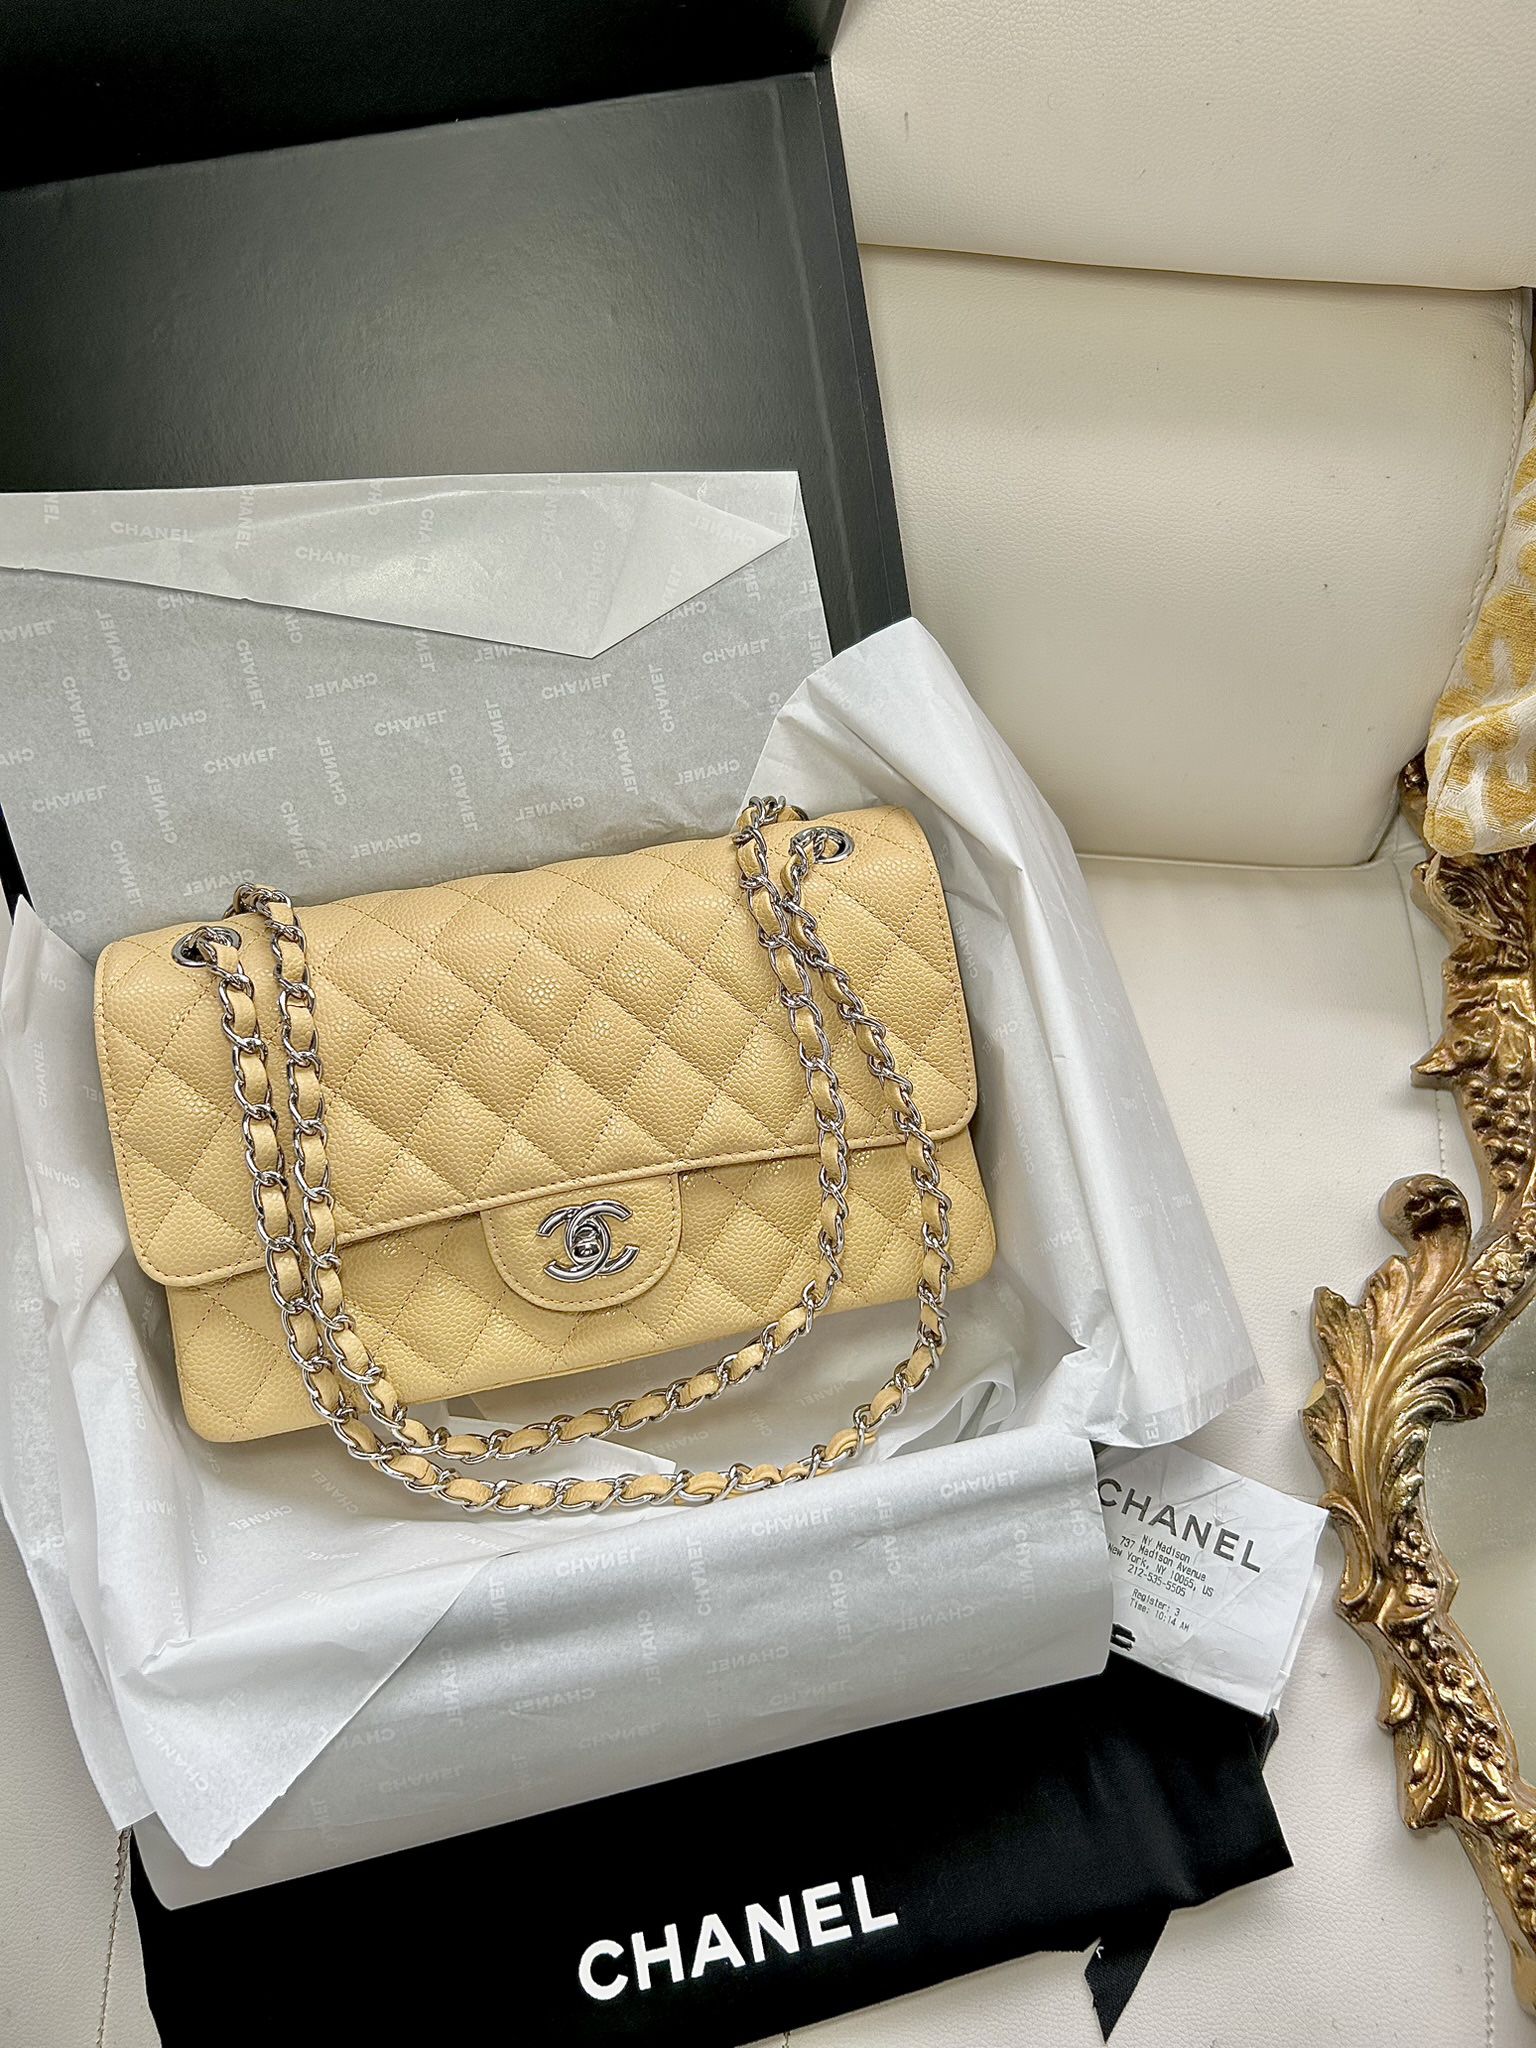 Chanel Caviar Beige Flap Bag Used/Negotiable